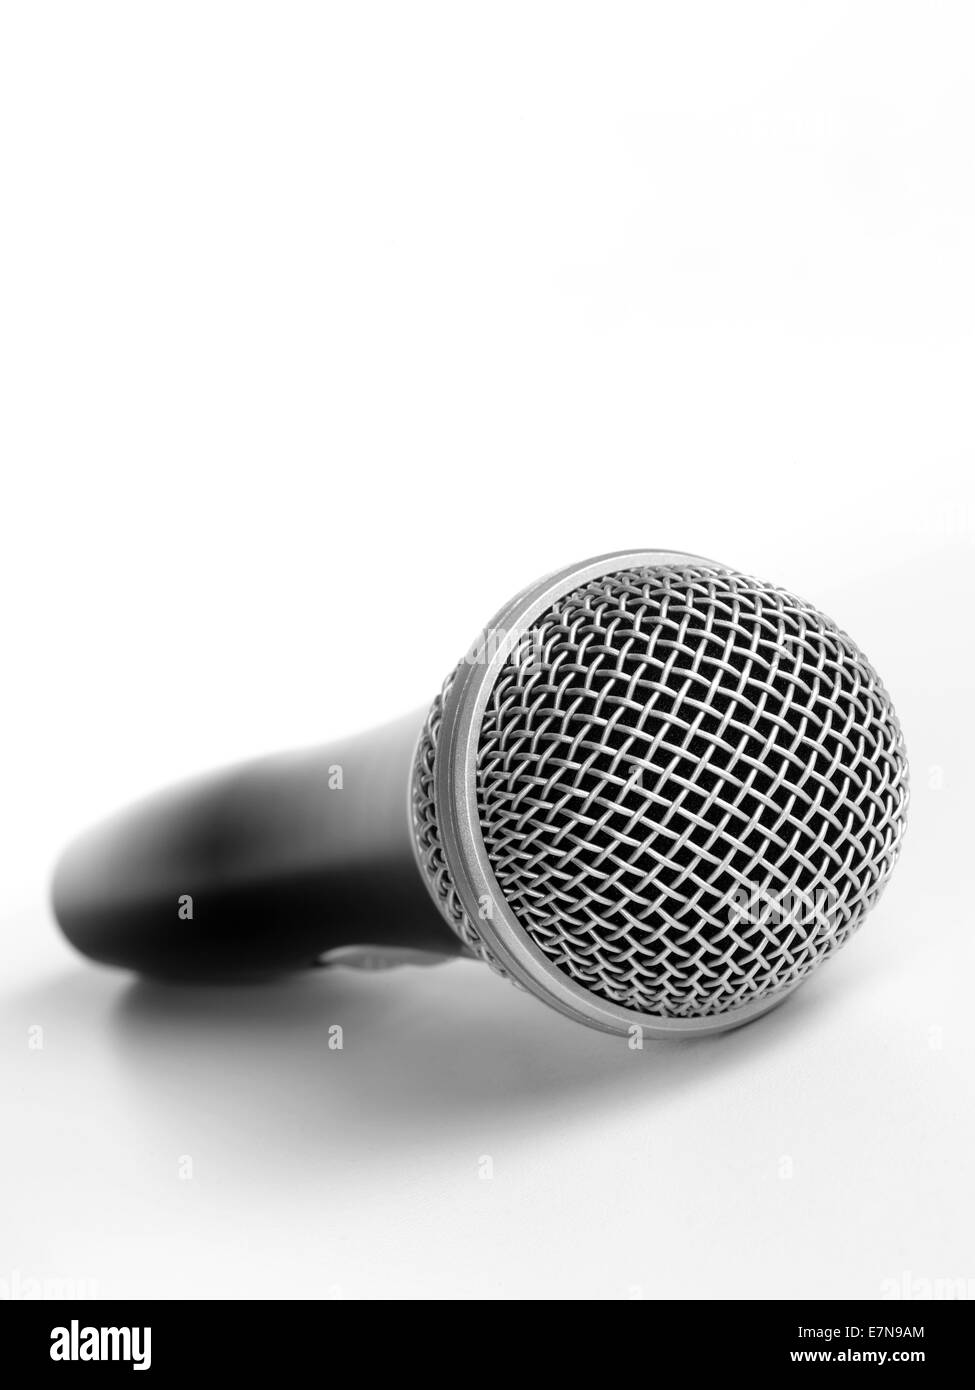 Microphone isolated on white Banque D'Images